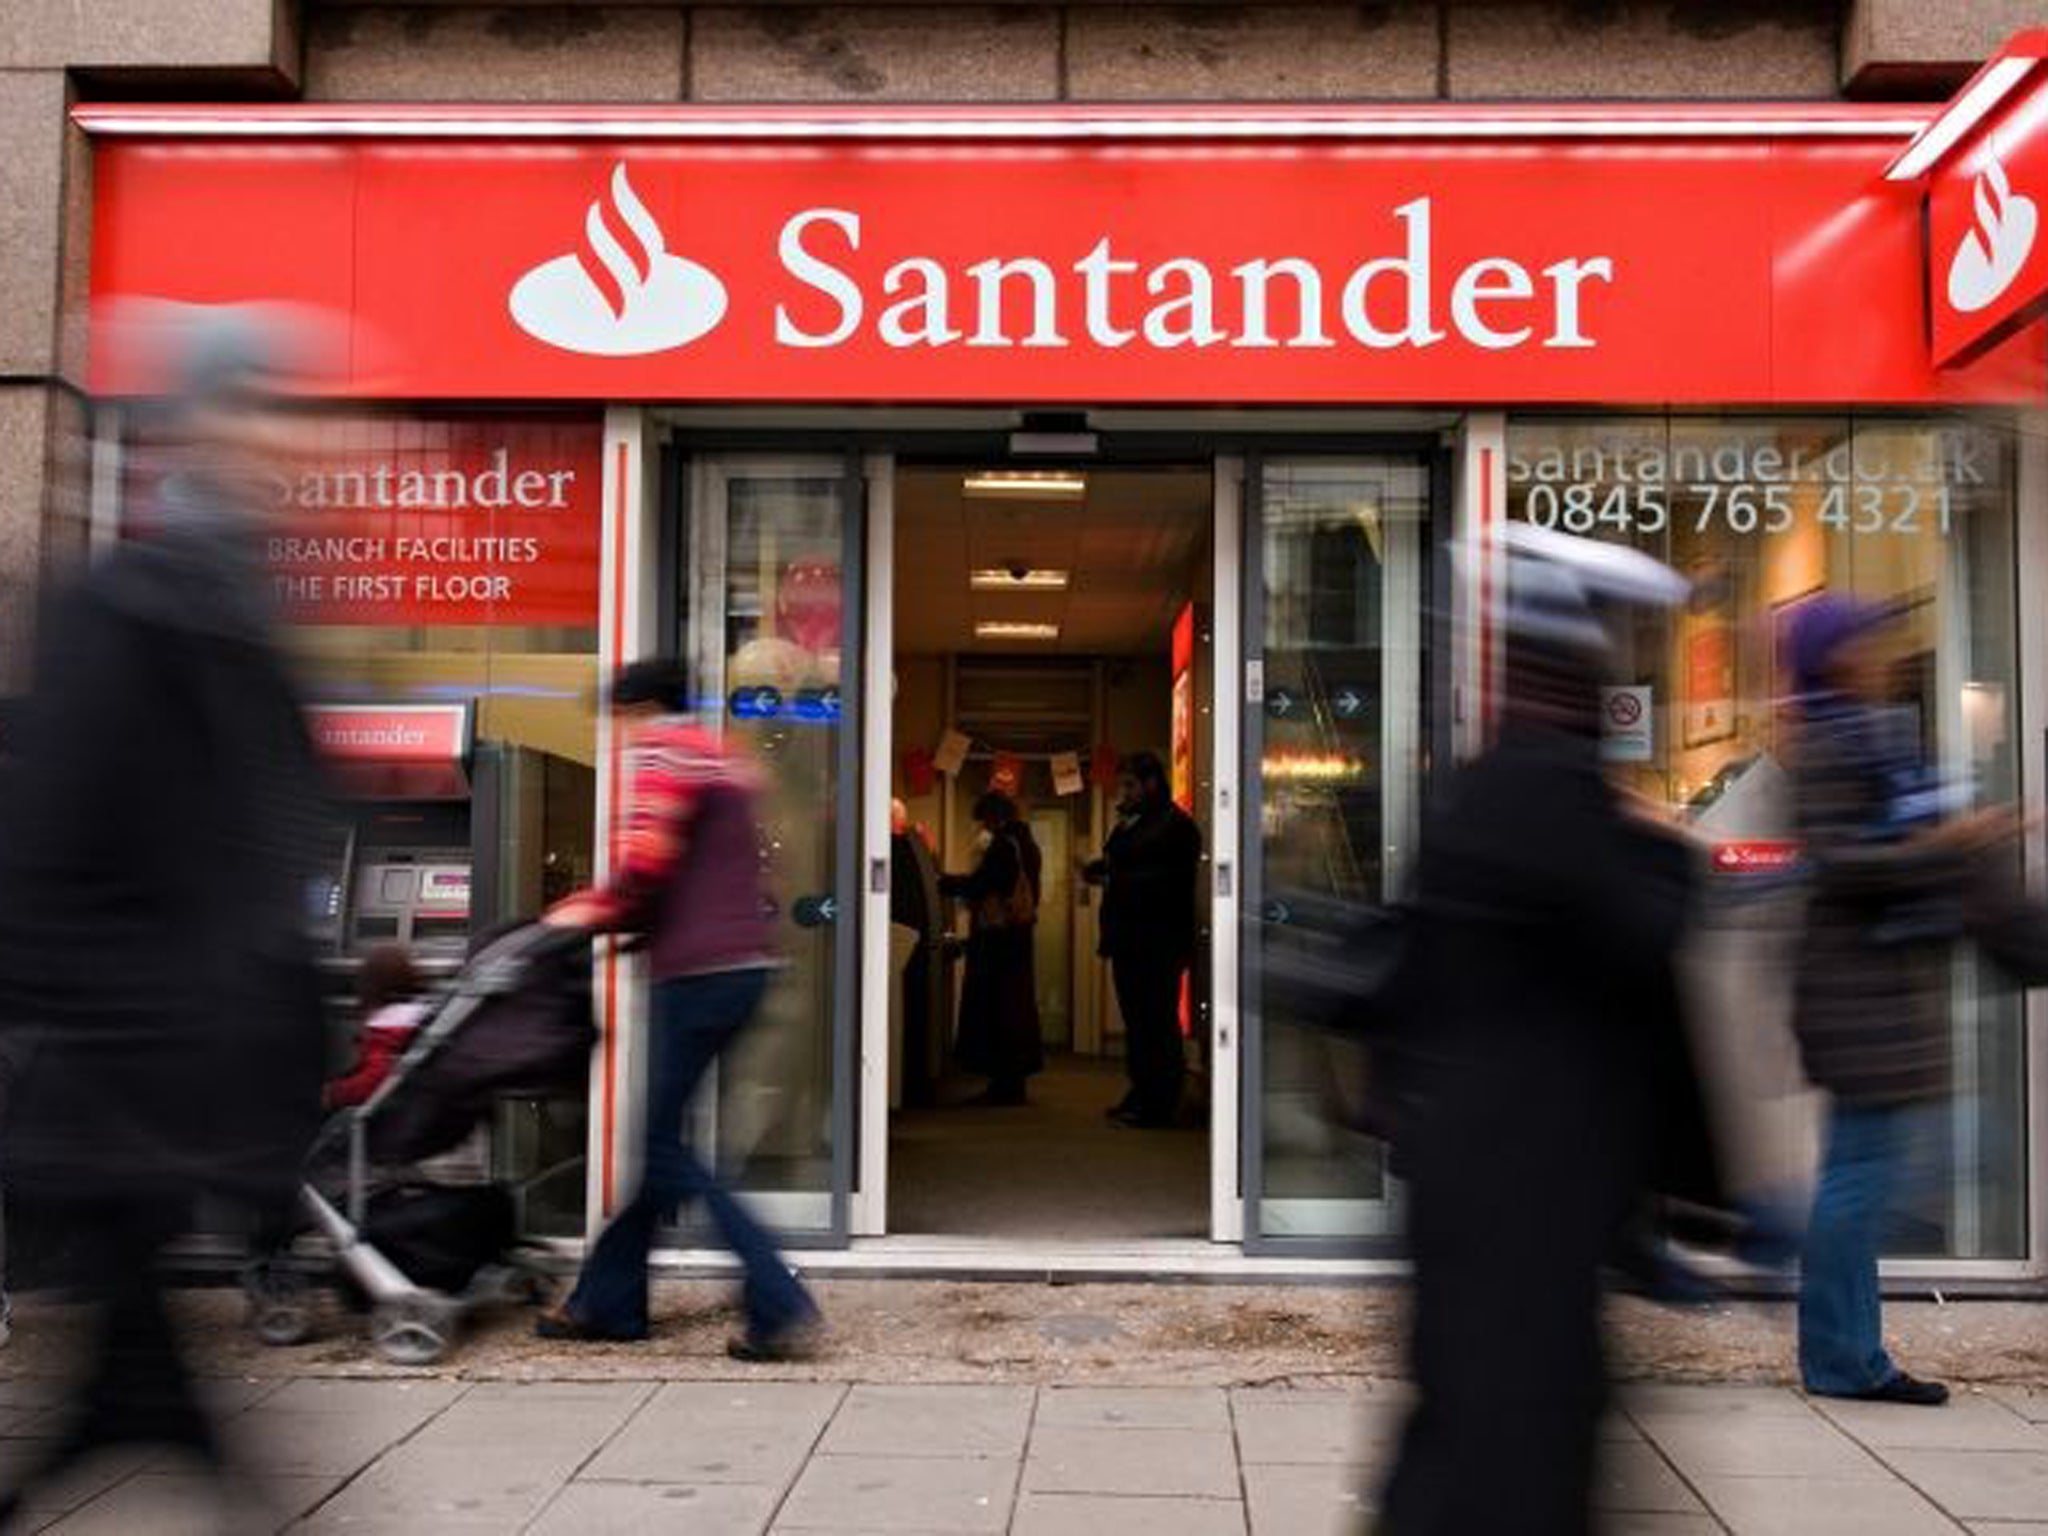 Santander may not be the only bank to take flight from these accounts